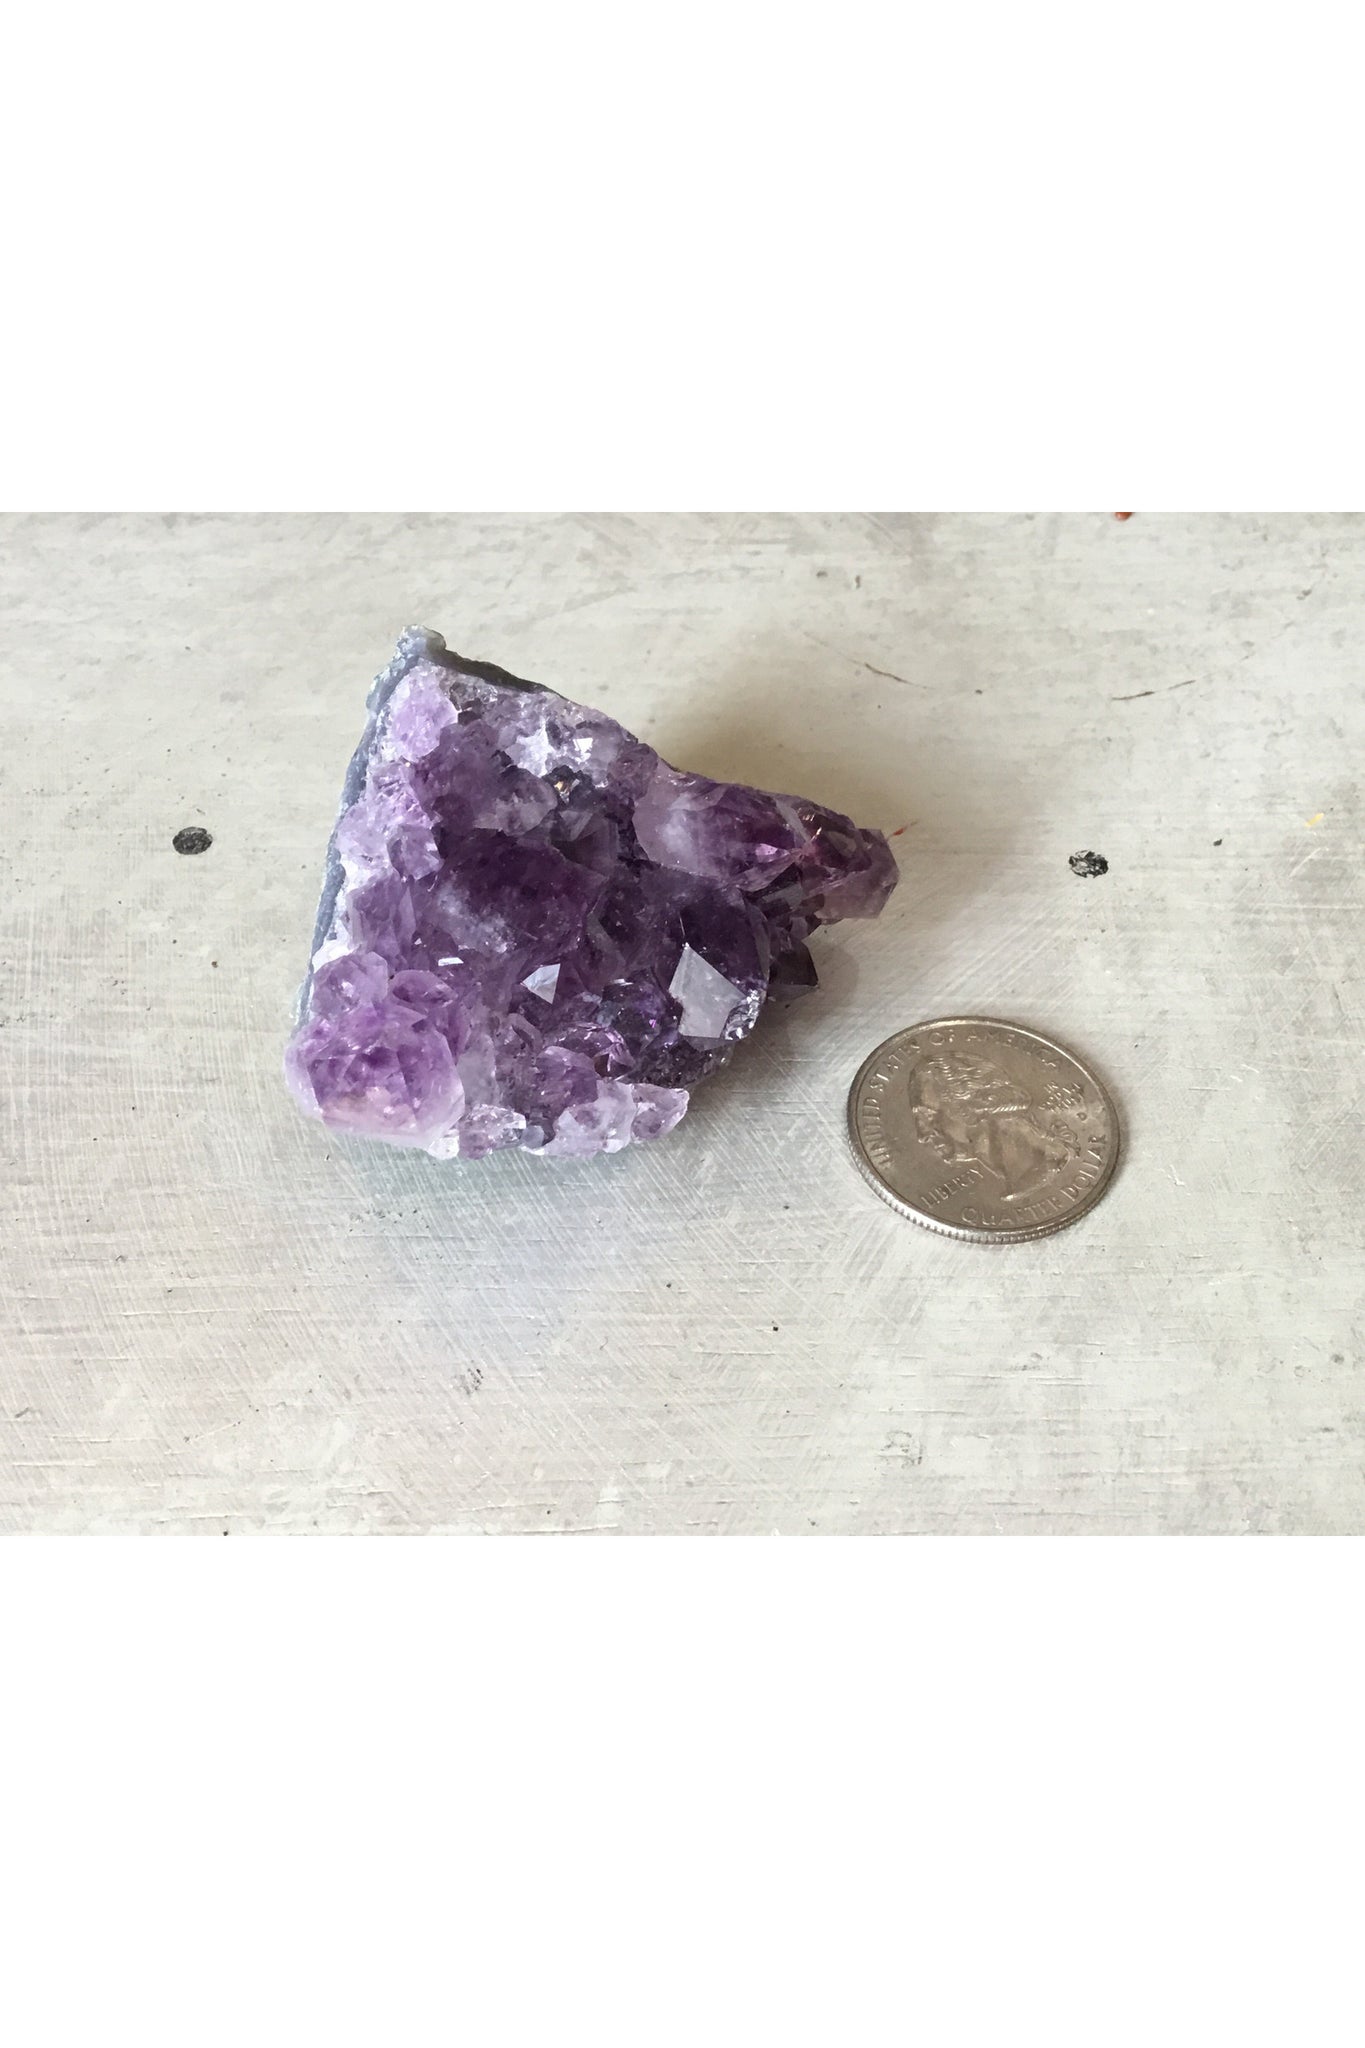 Small Amethyst Geode Majestic Hudson Lifestyle Experiences